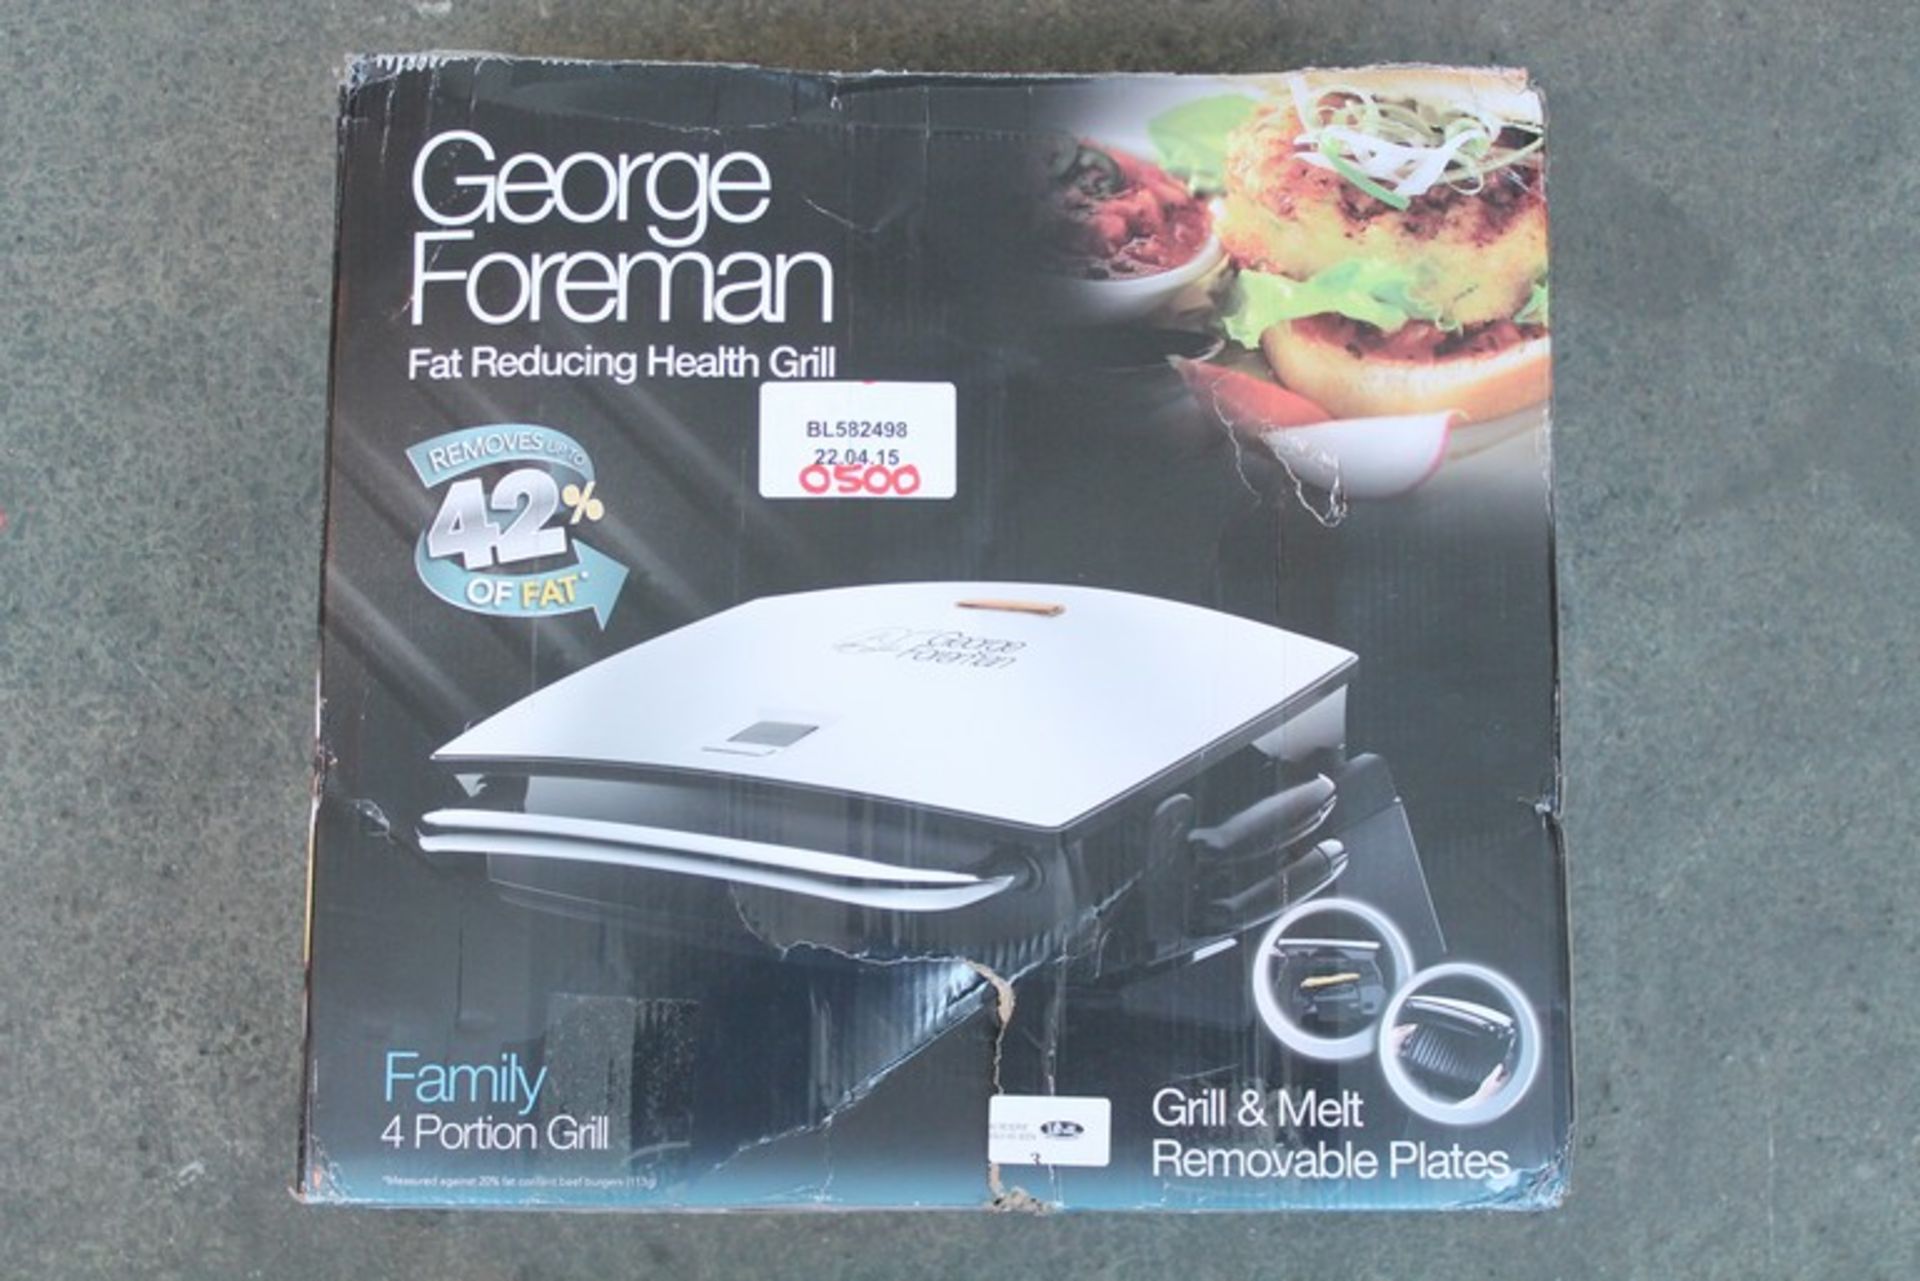 1 x BOXED GEORGE FOREMAN FAT REDUCING HEALTH GRILL RRP £50 (582498)   *PLEASE NOTE THAT THE BID